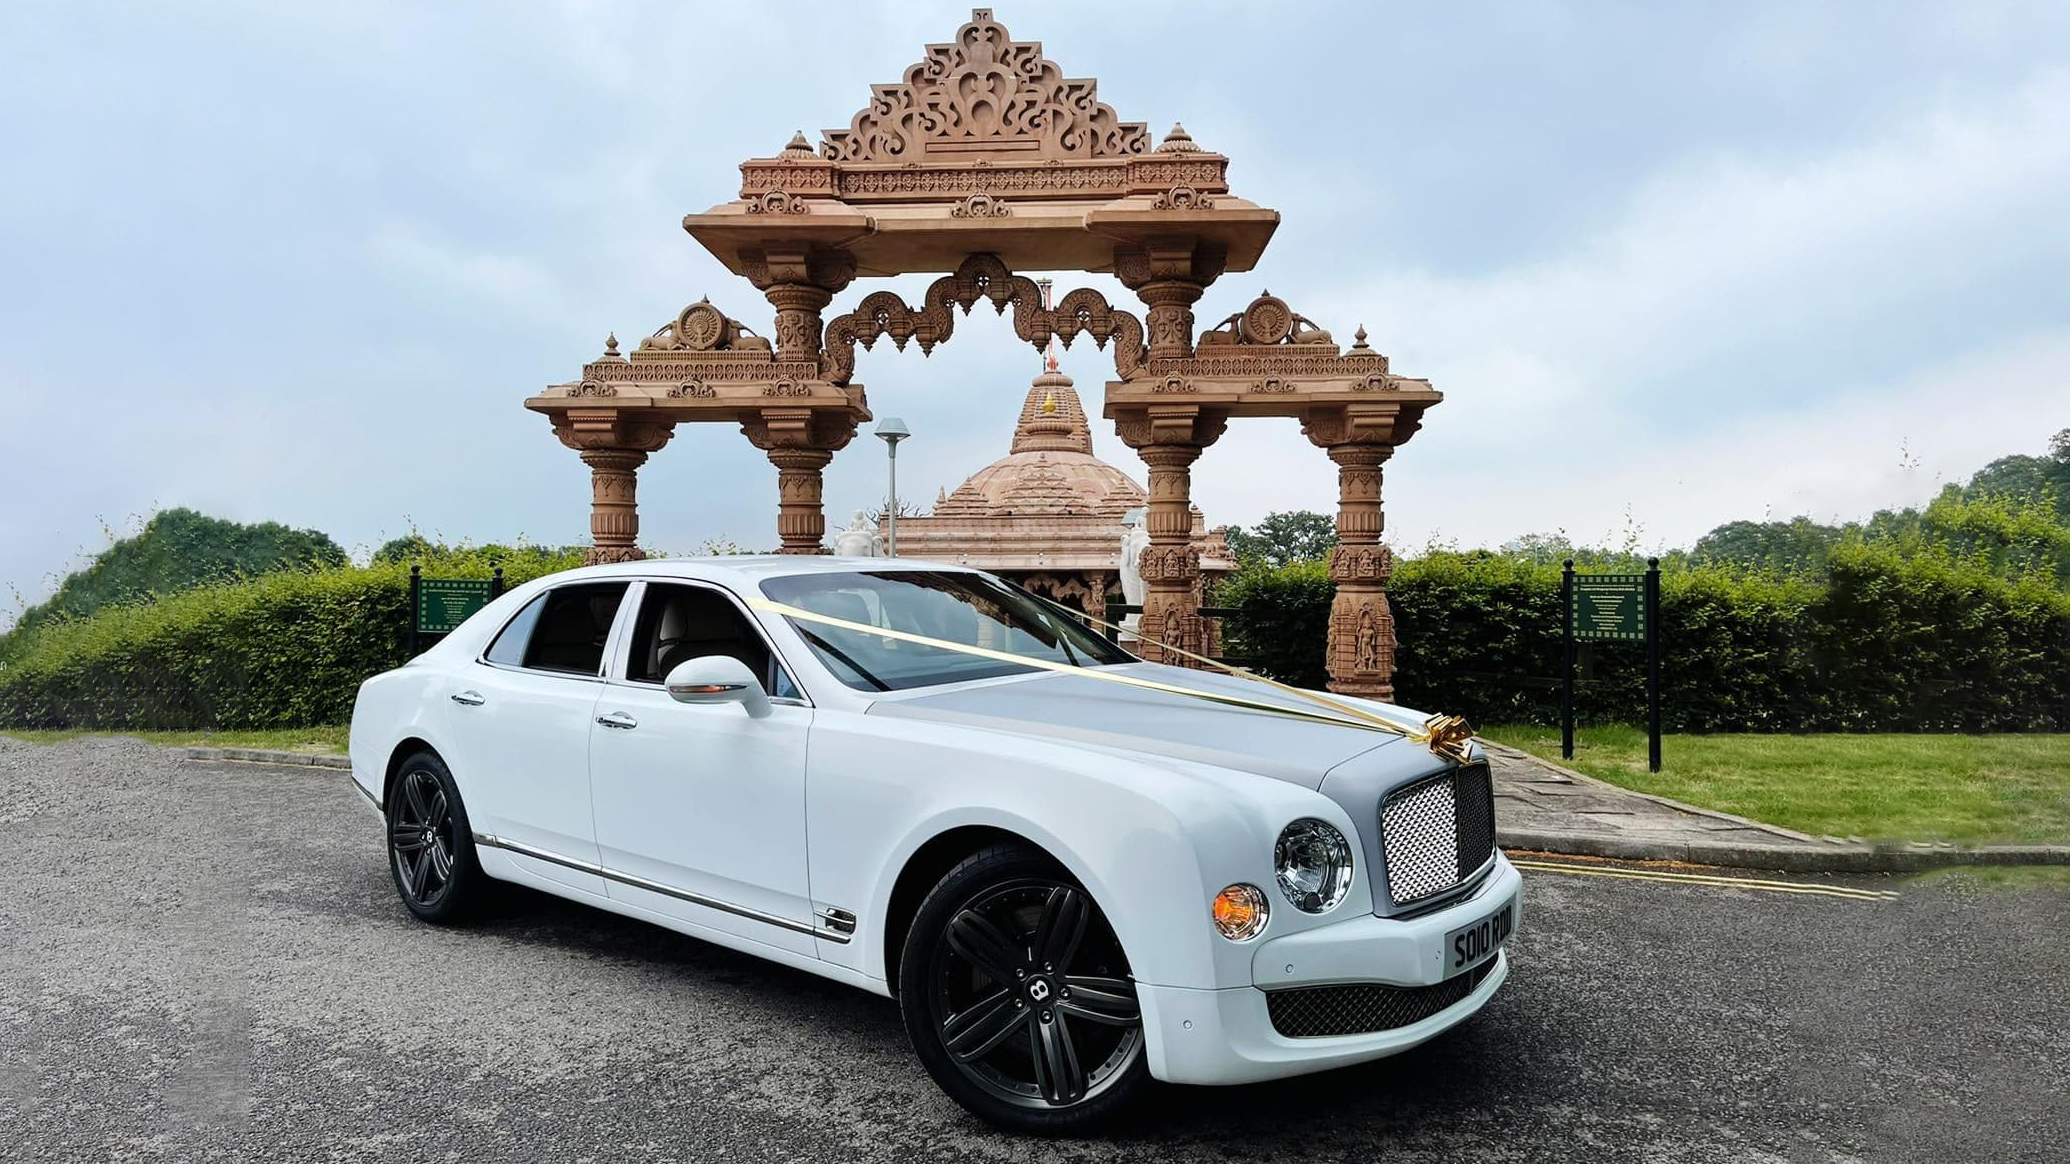 Modern Bentley Mulsanne with Black alloy wheels and Gold ribbons park in front of an Asian Temple in Stotfold.